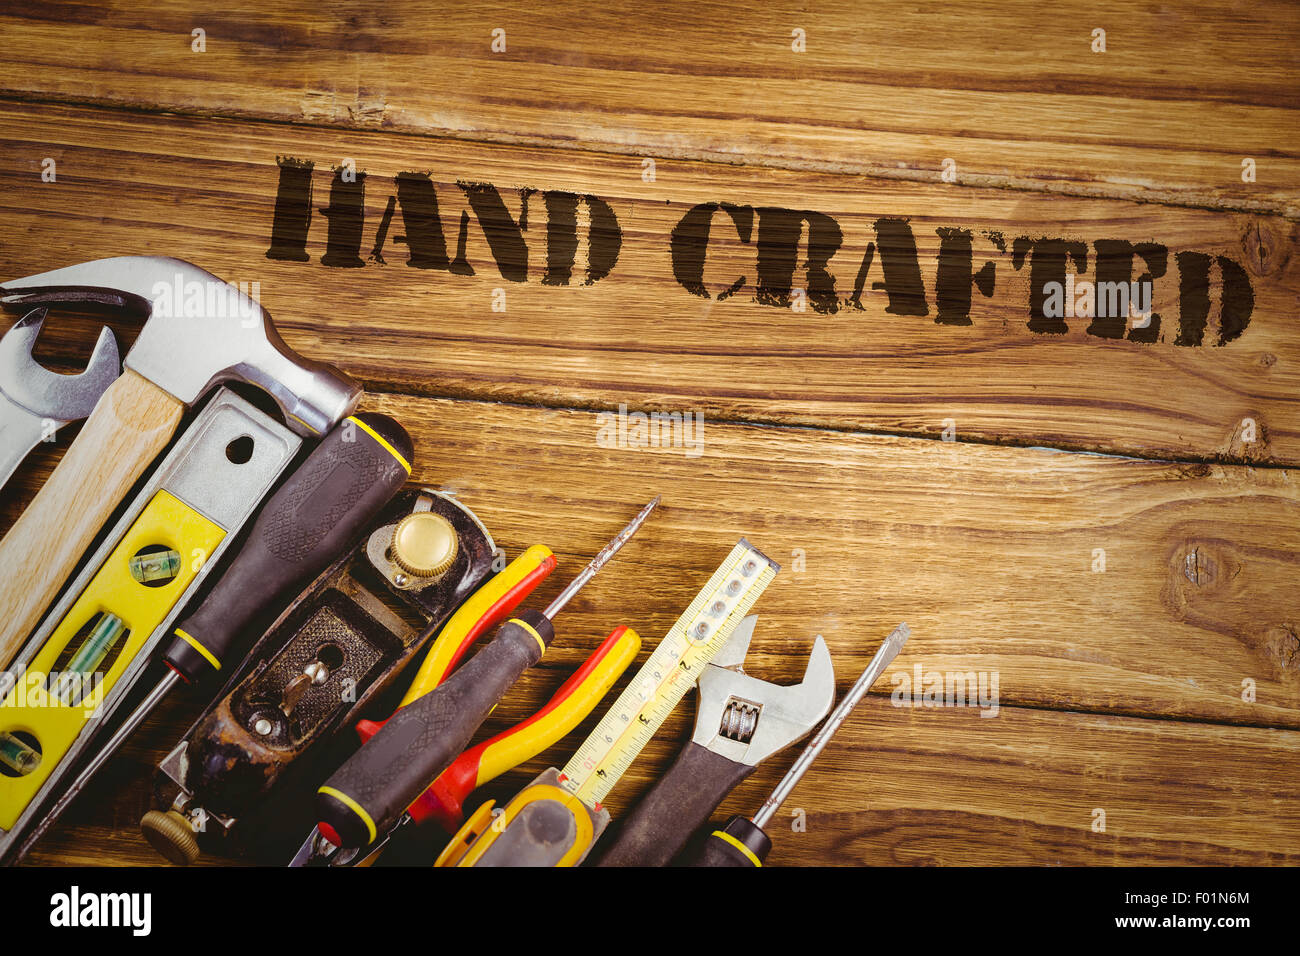 Hand crafted against tools on desk Stock Photo